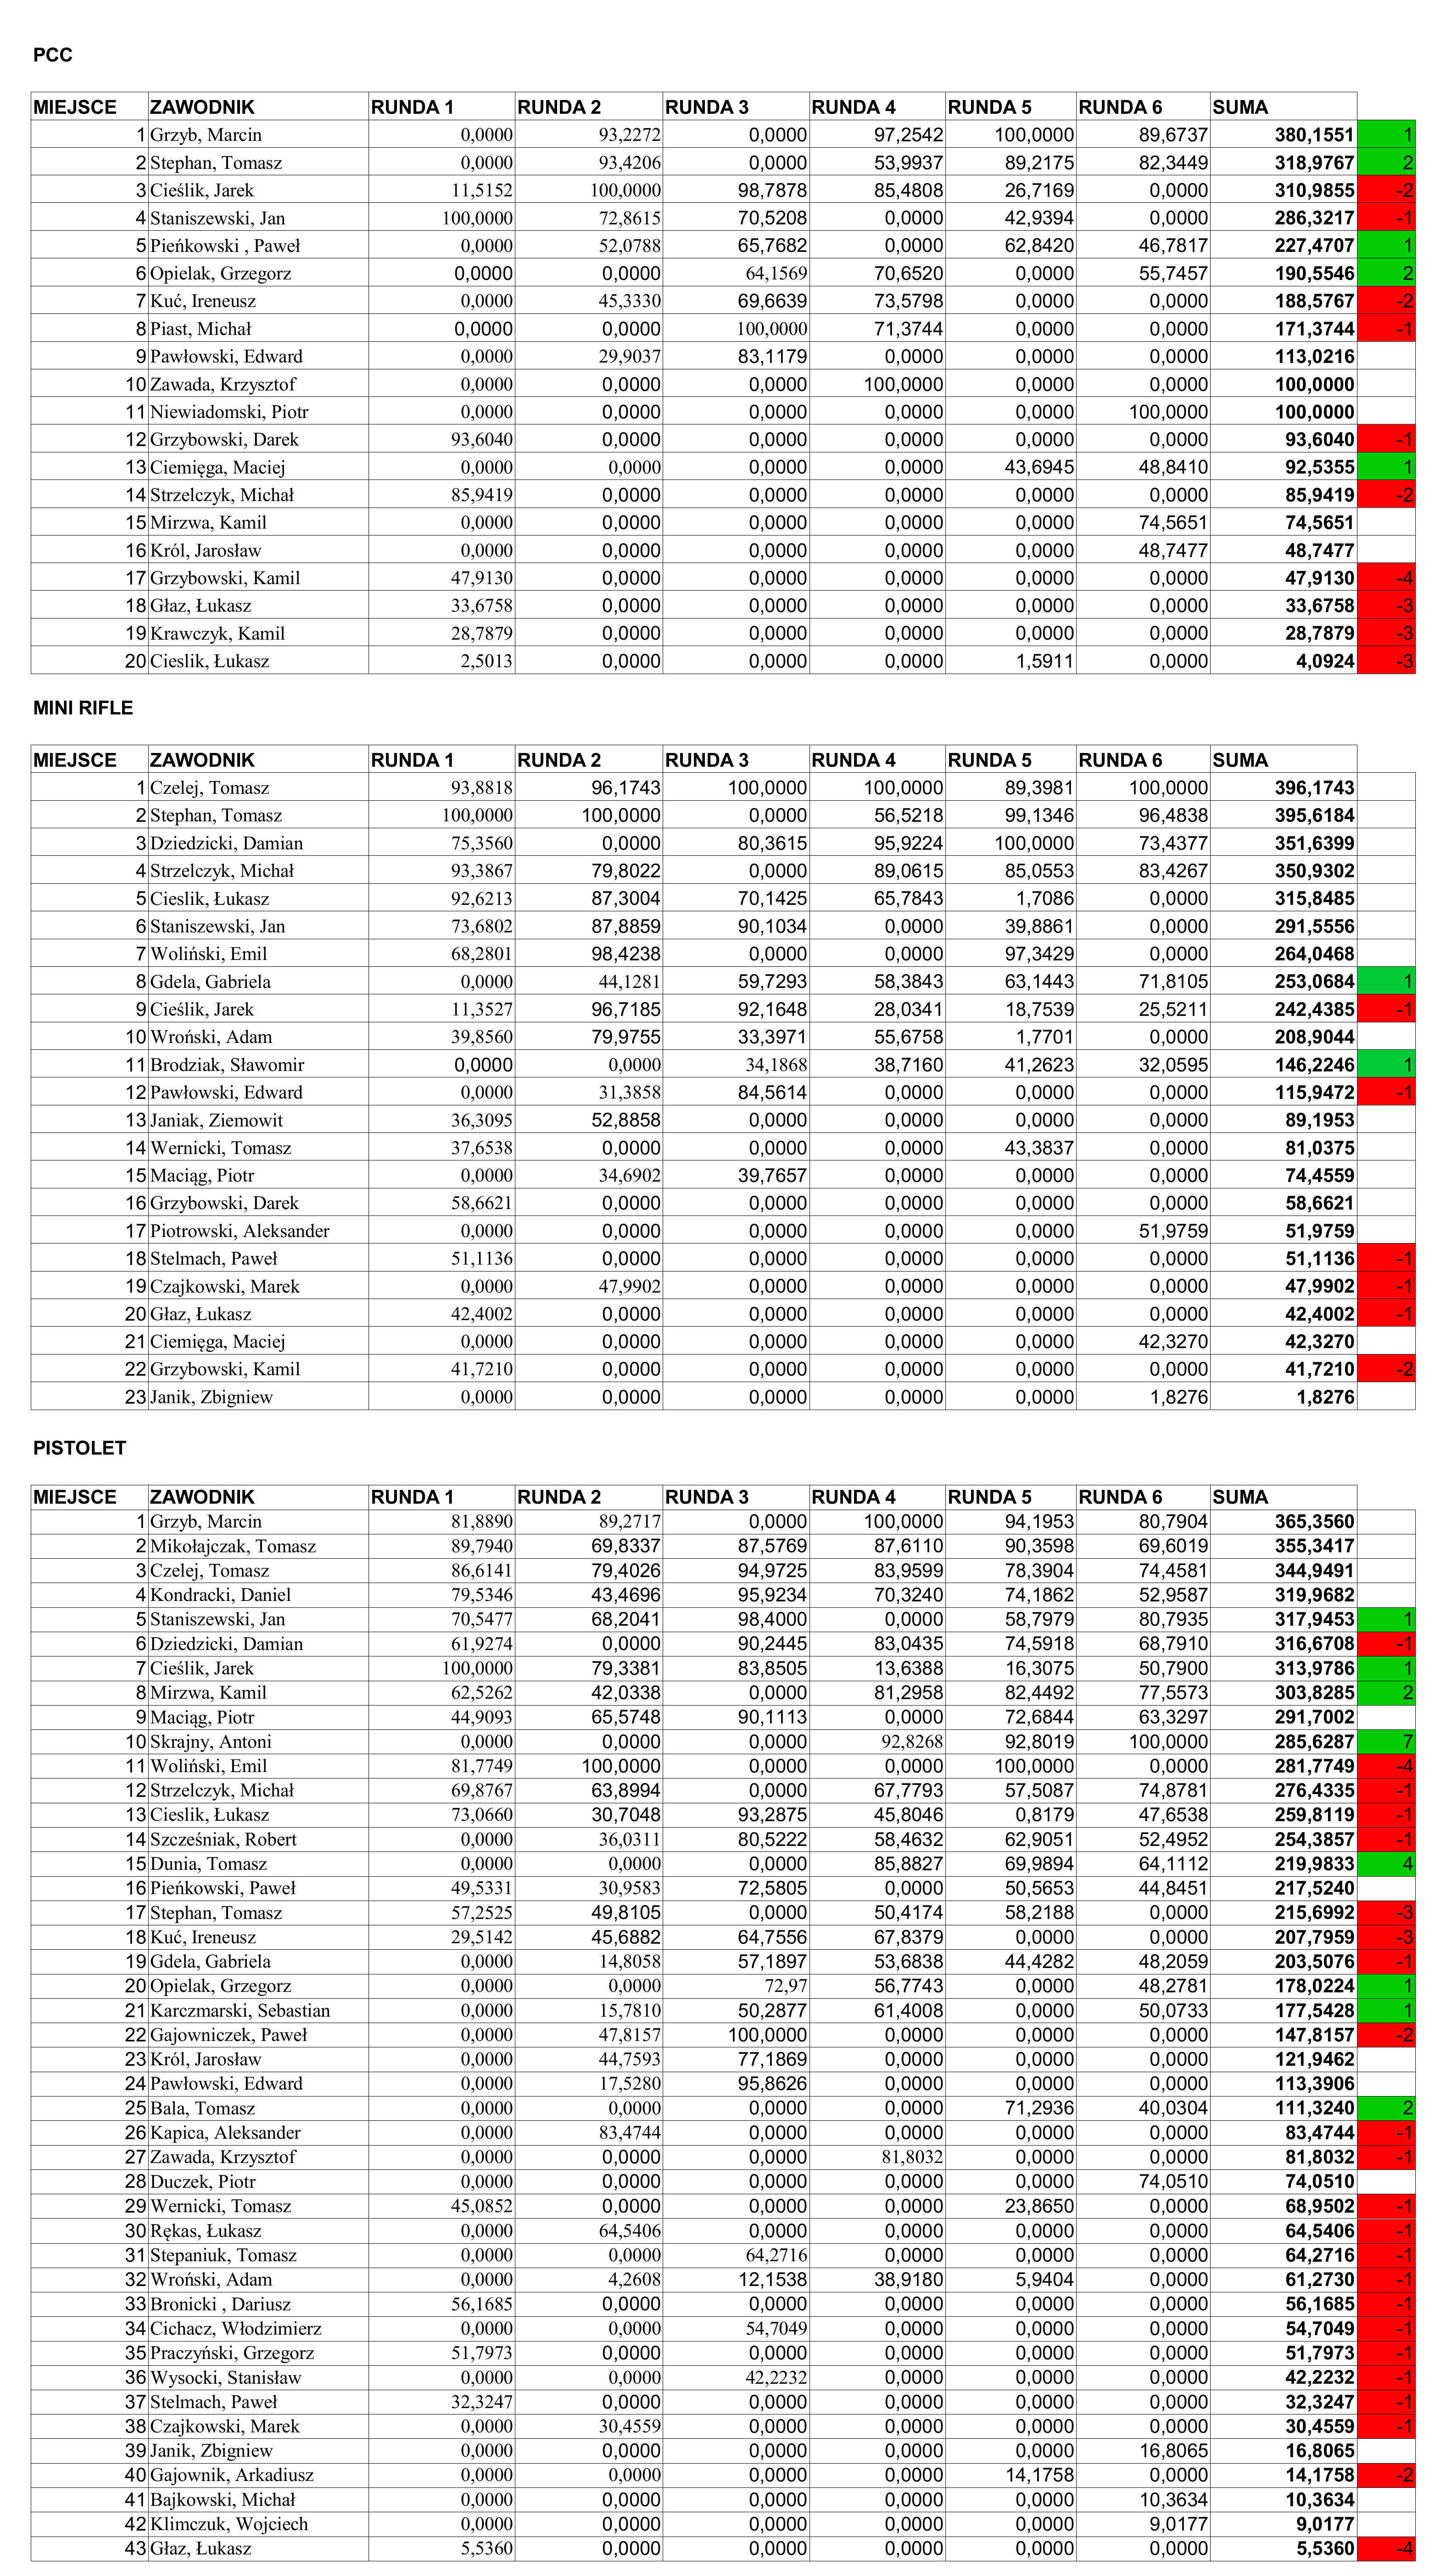 Ranking LCS VIS IPSC CUP